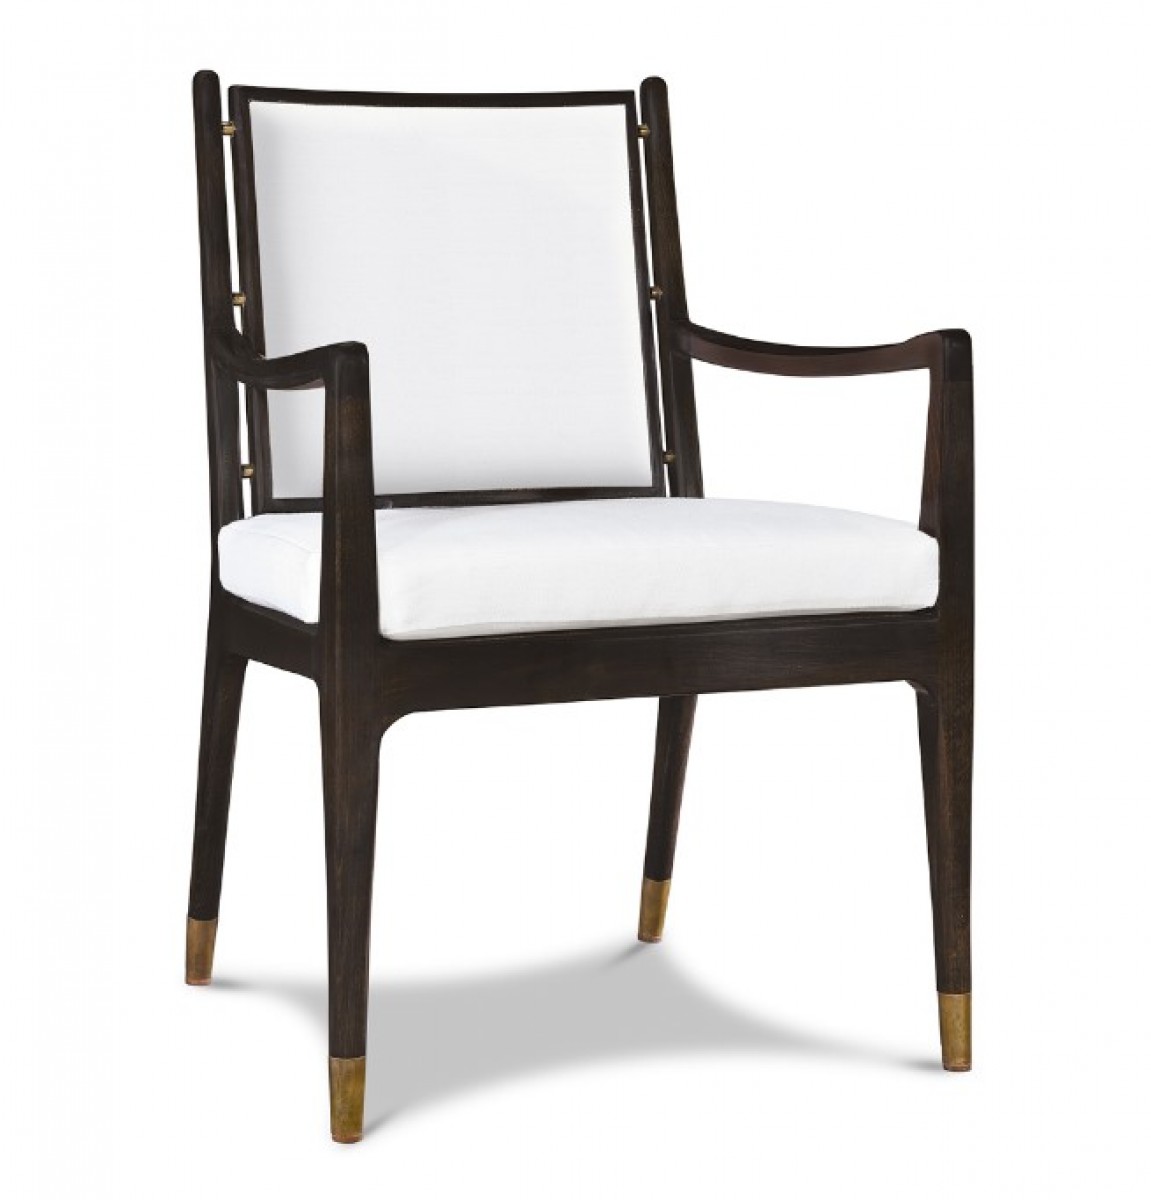 Bahl II Arm Upholstered Chair